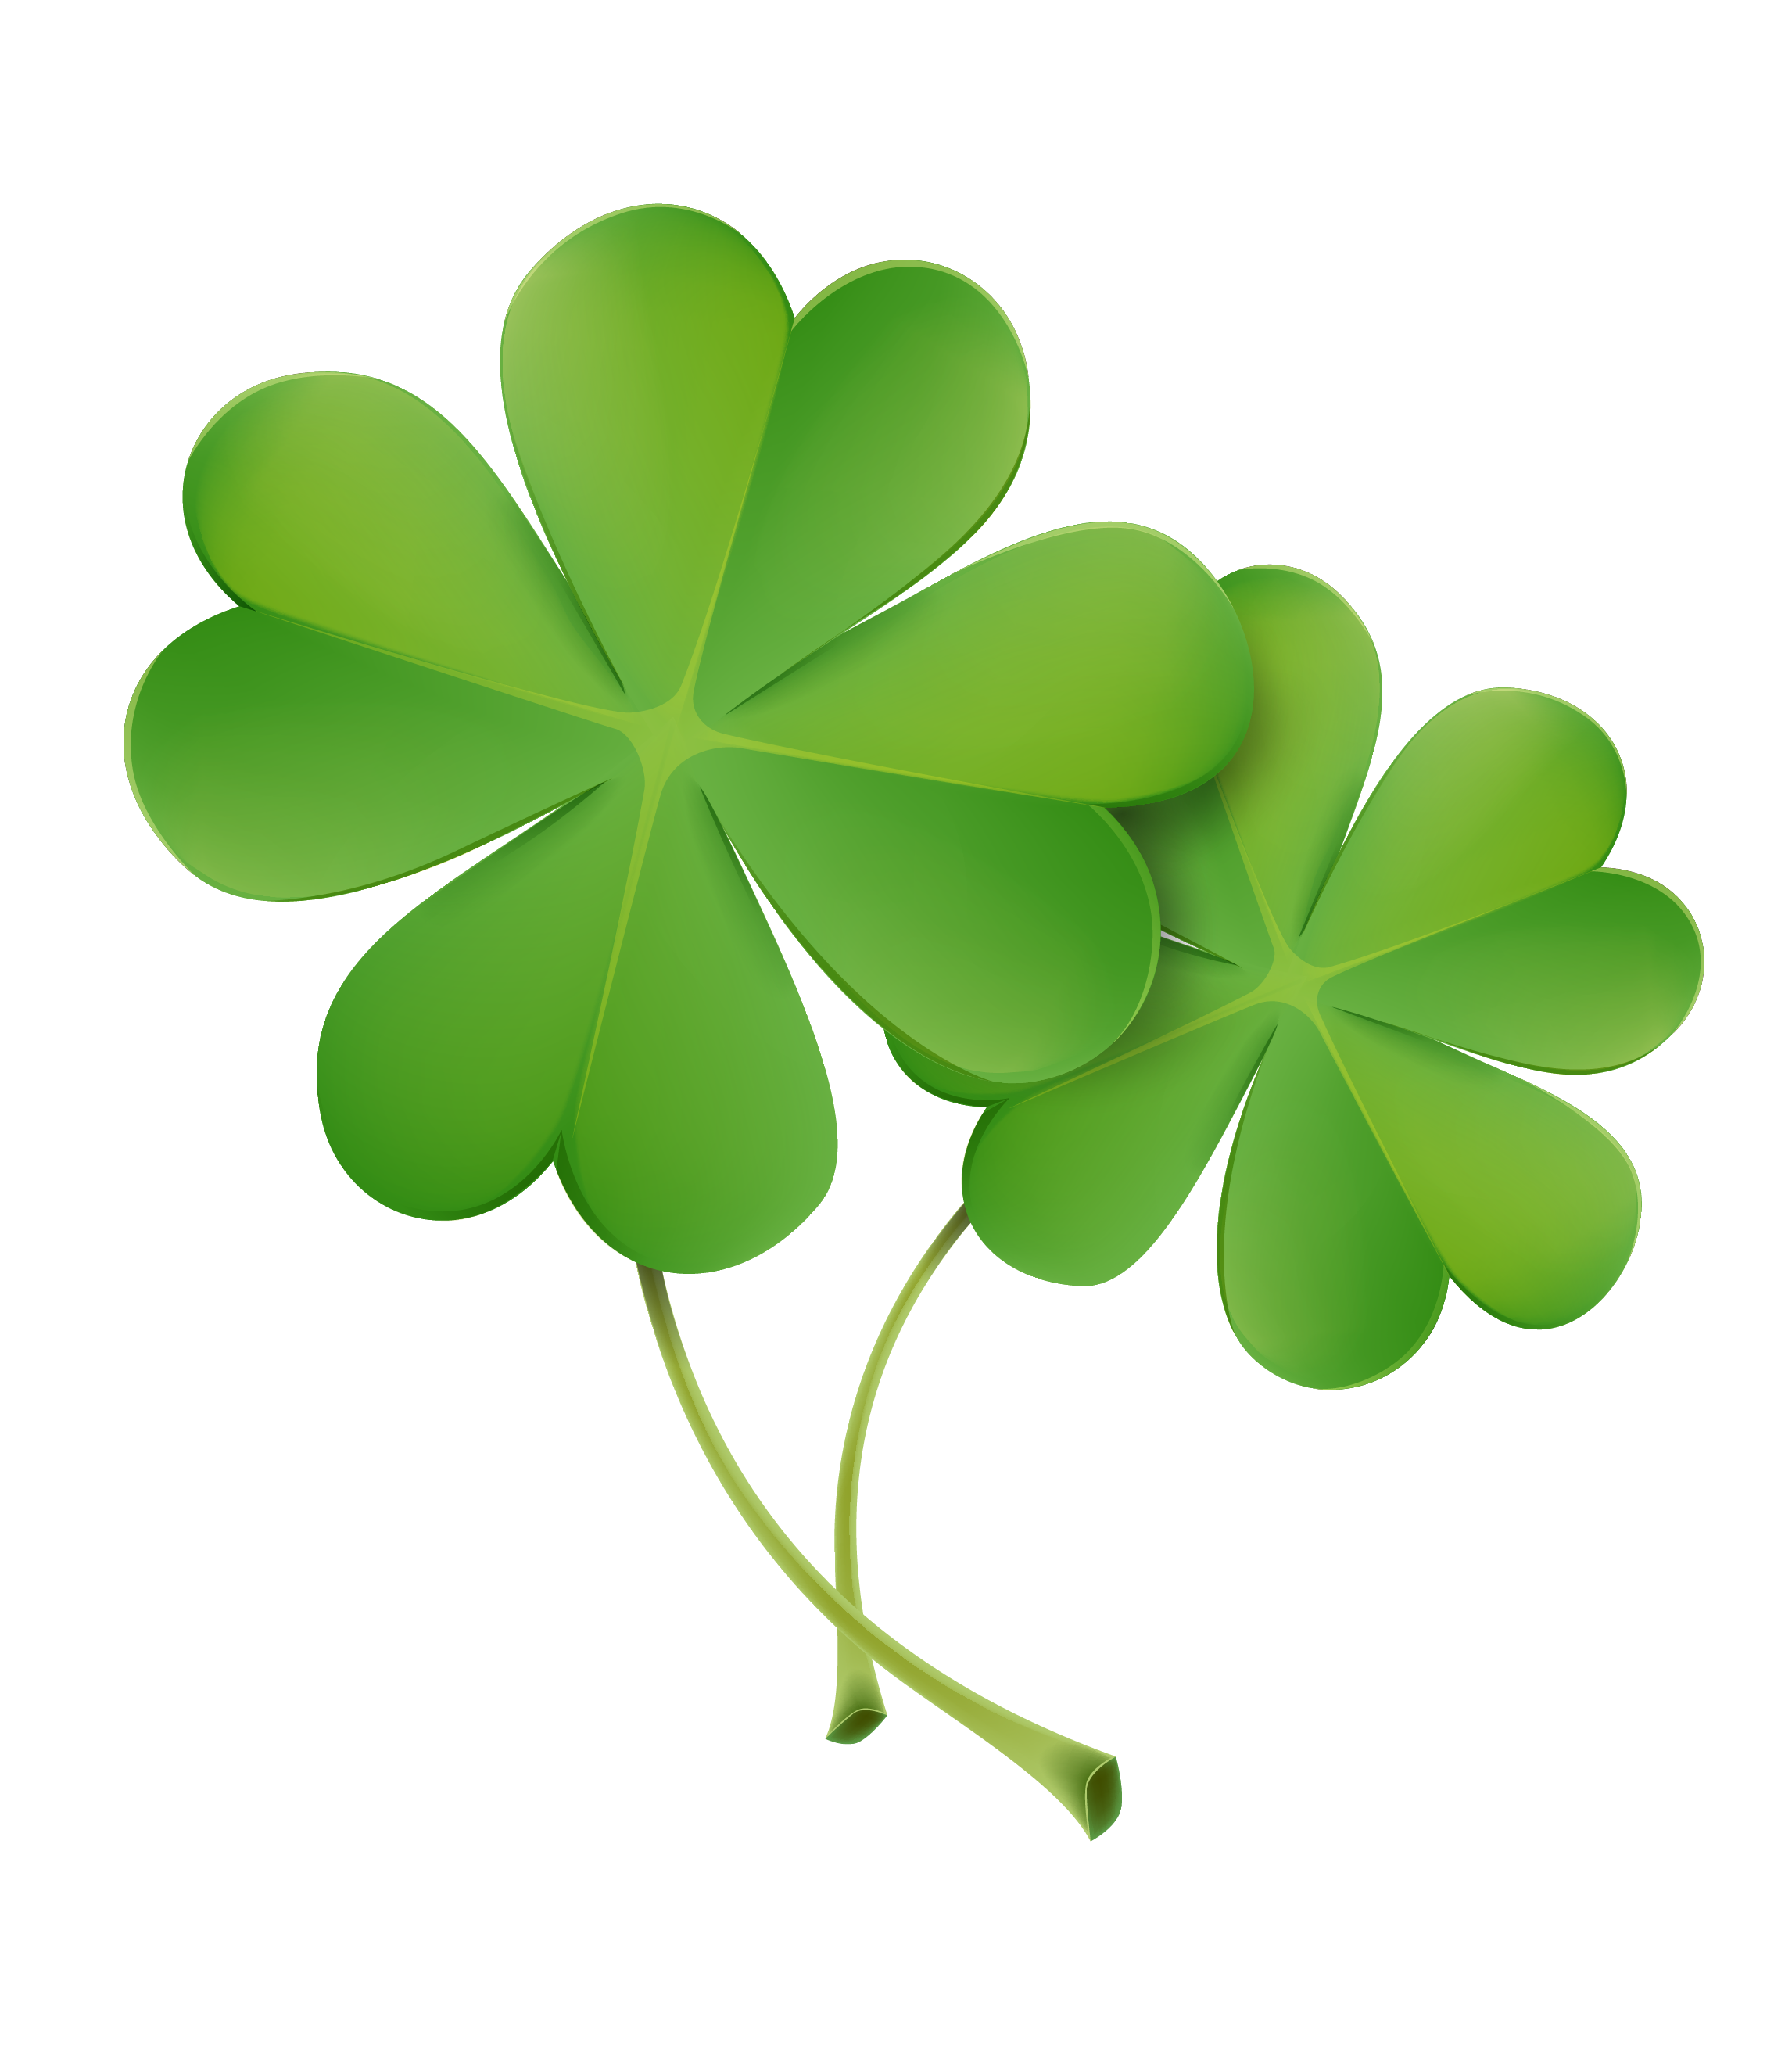 4 Leaf Clover Vector at GetDrawings | Free download